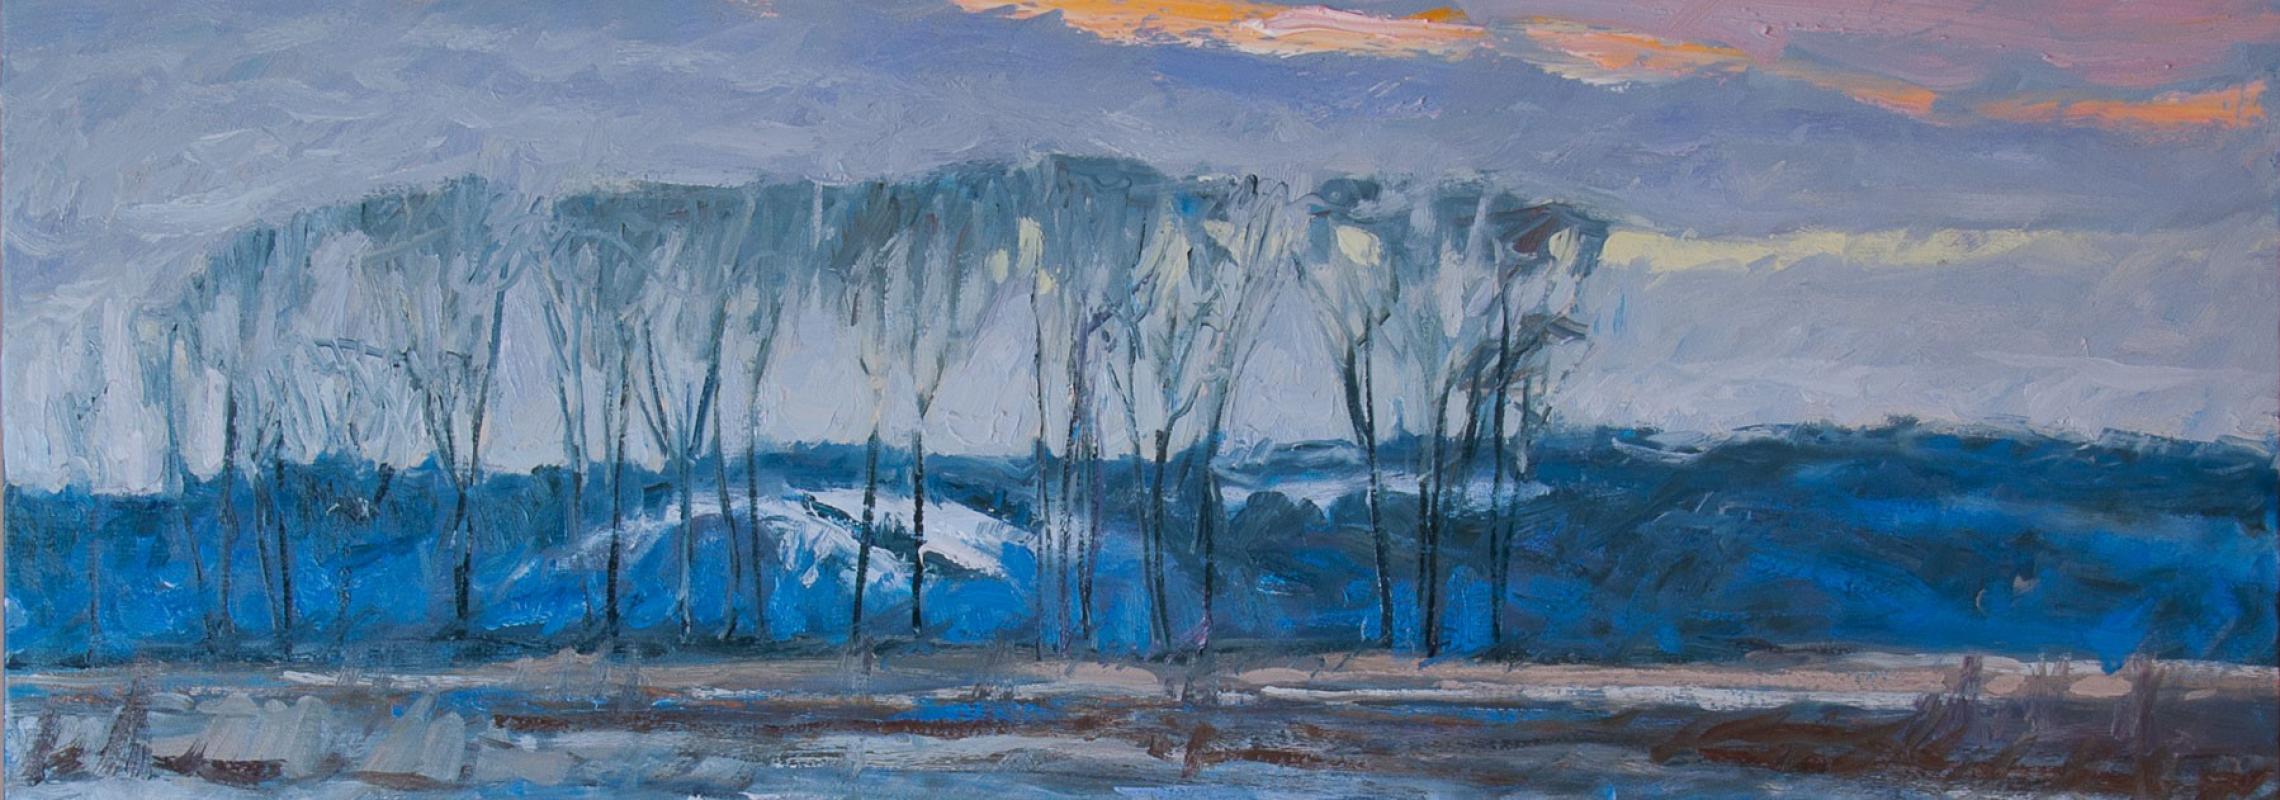 Painting with snowy field in foreground, bare trees in middleground, and cloudy sunset in background.